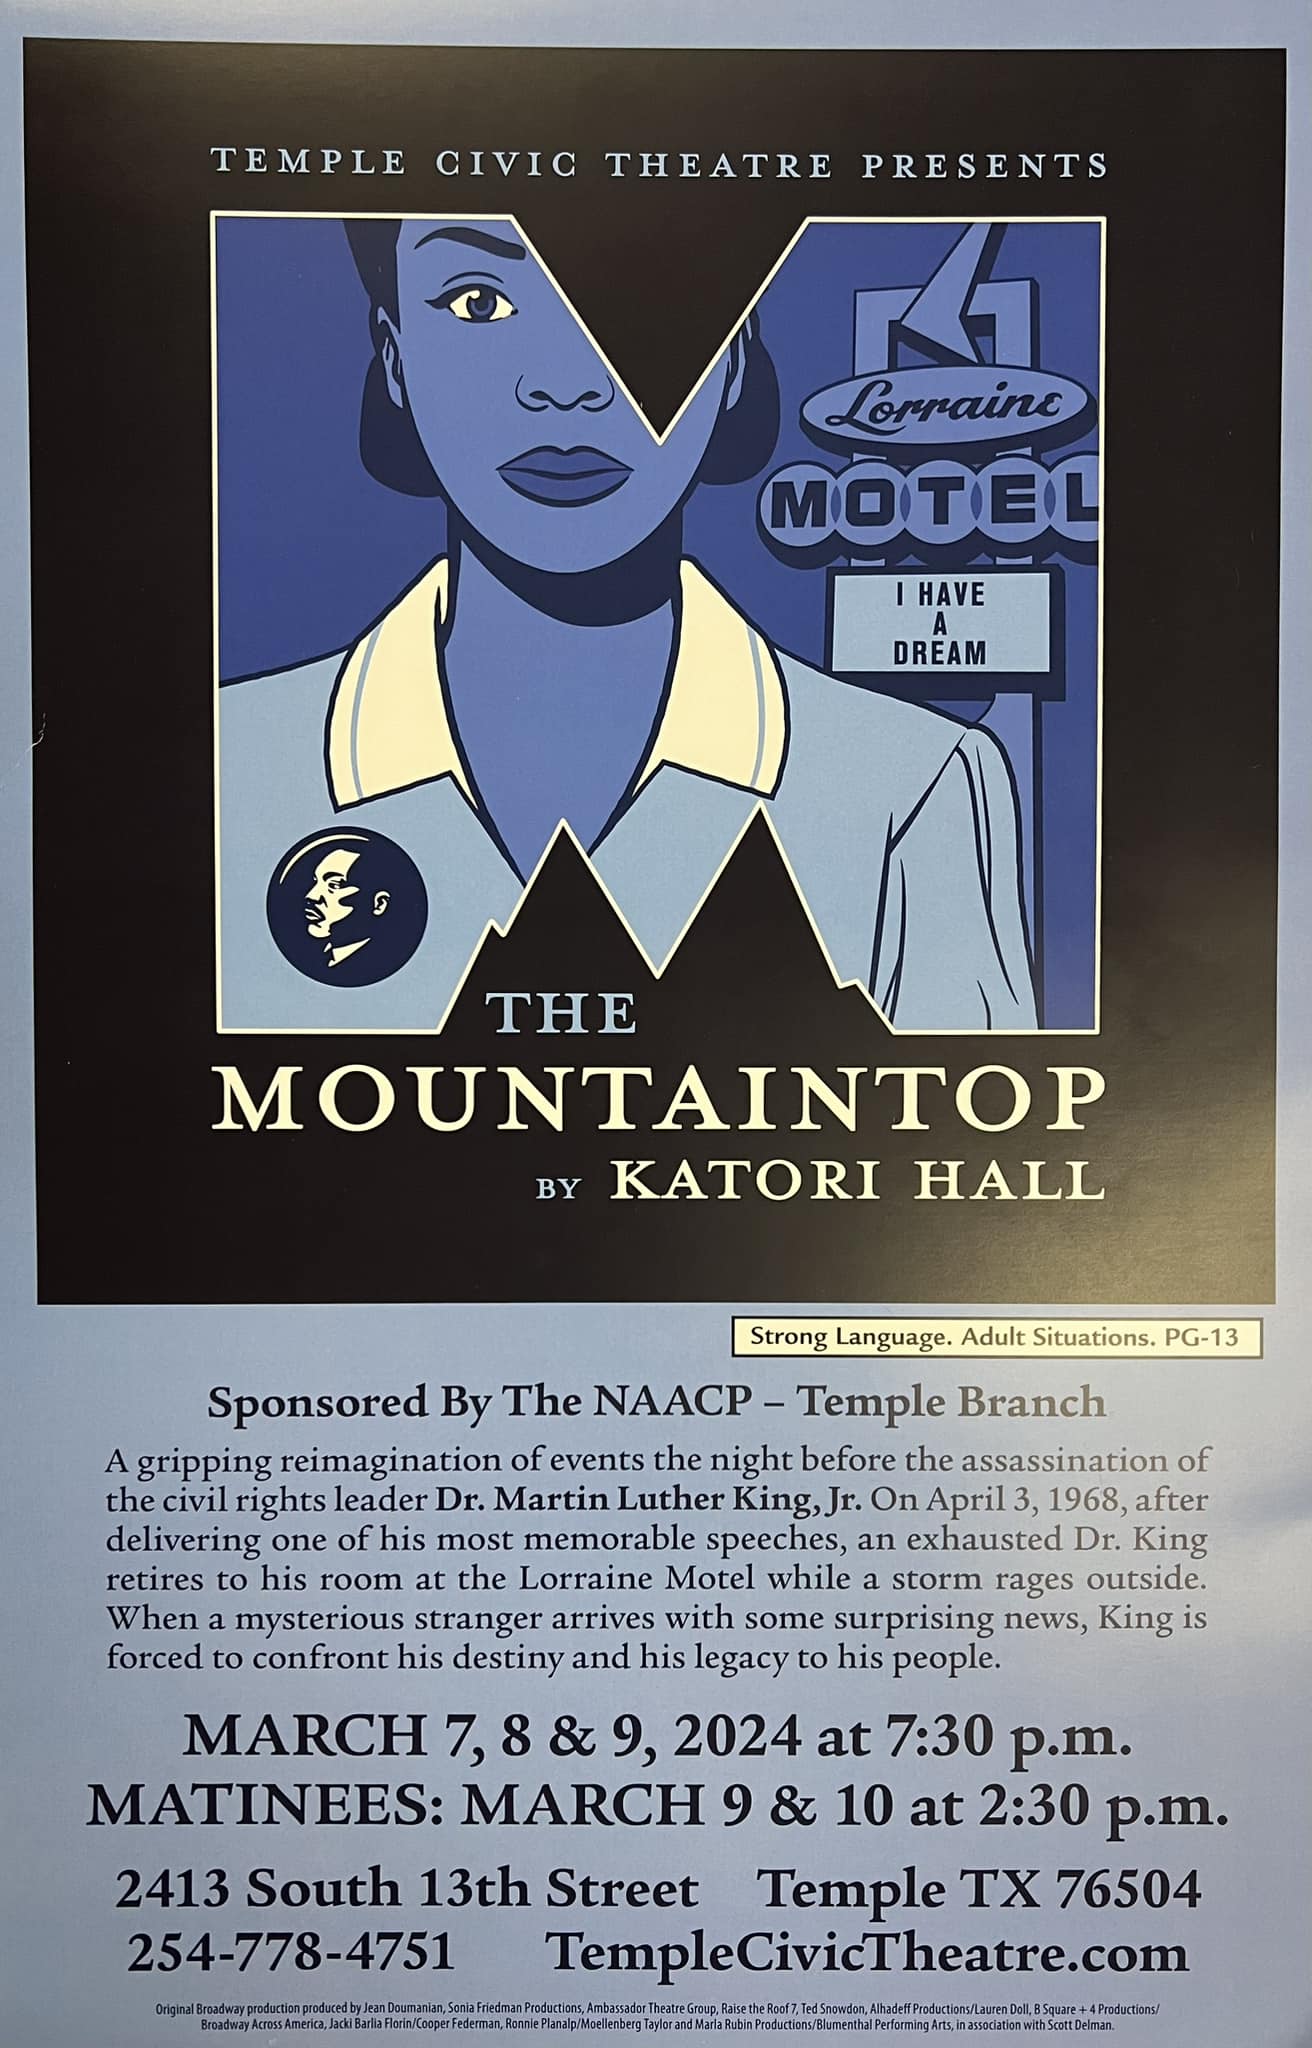 The Mountaintop by Temple Civic Theatre